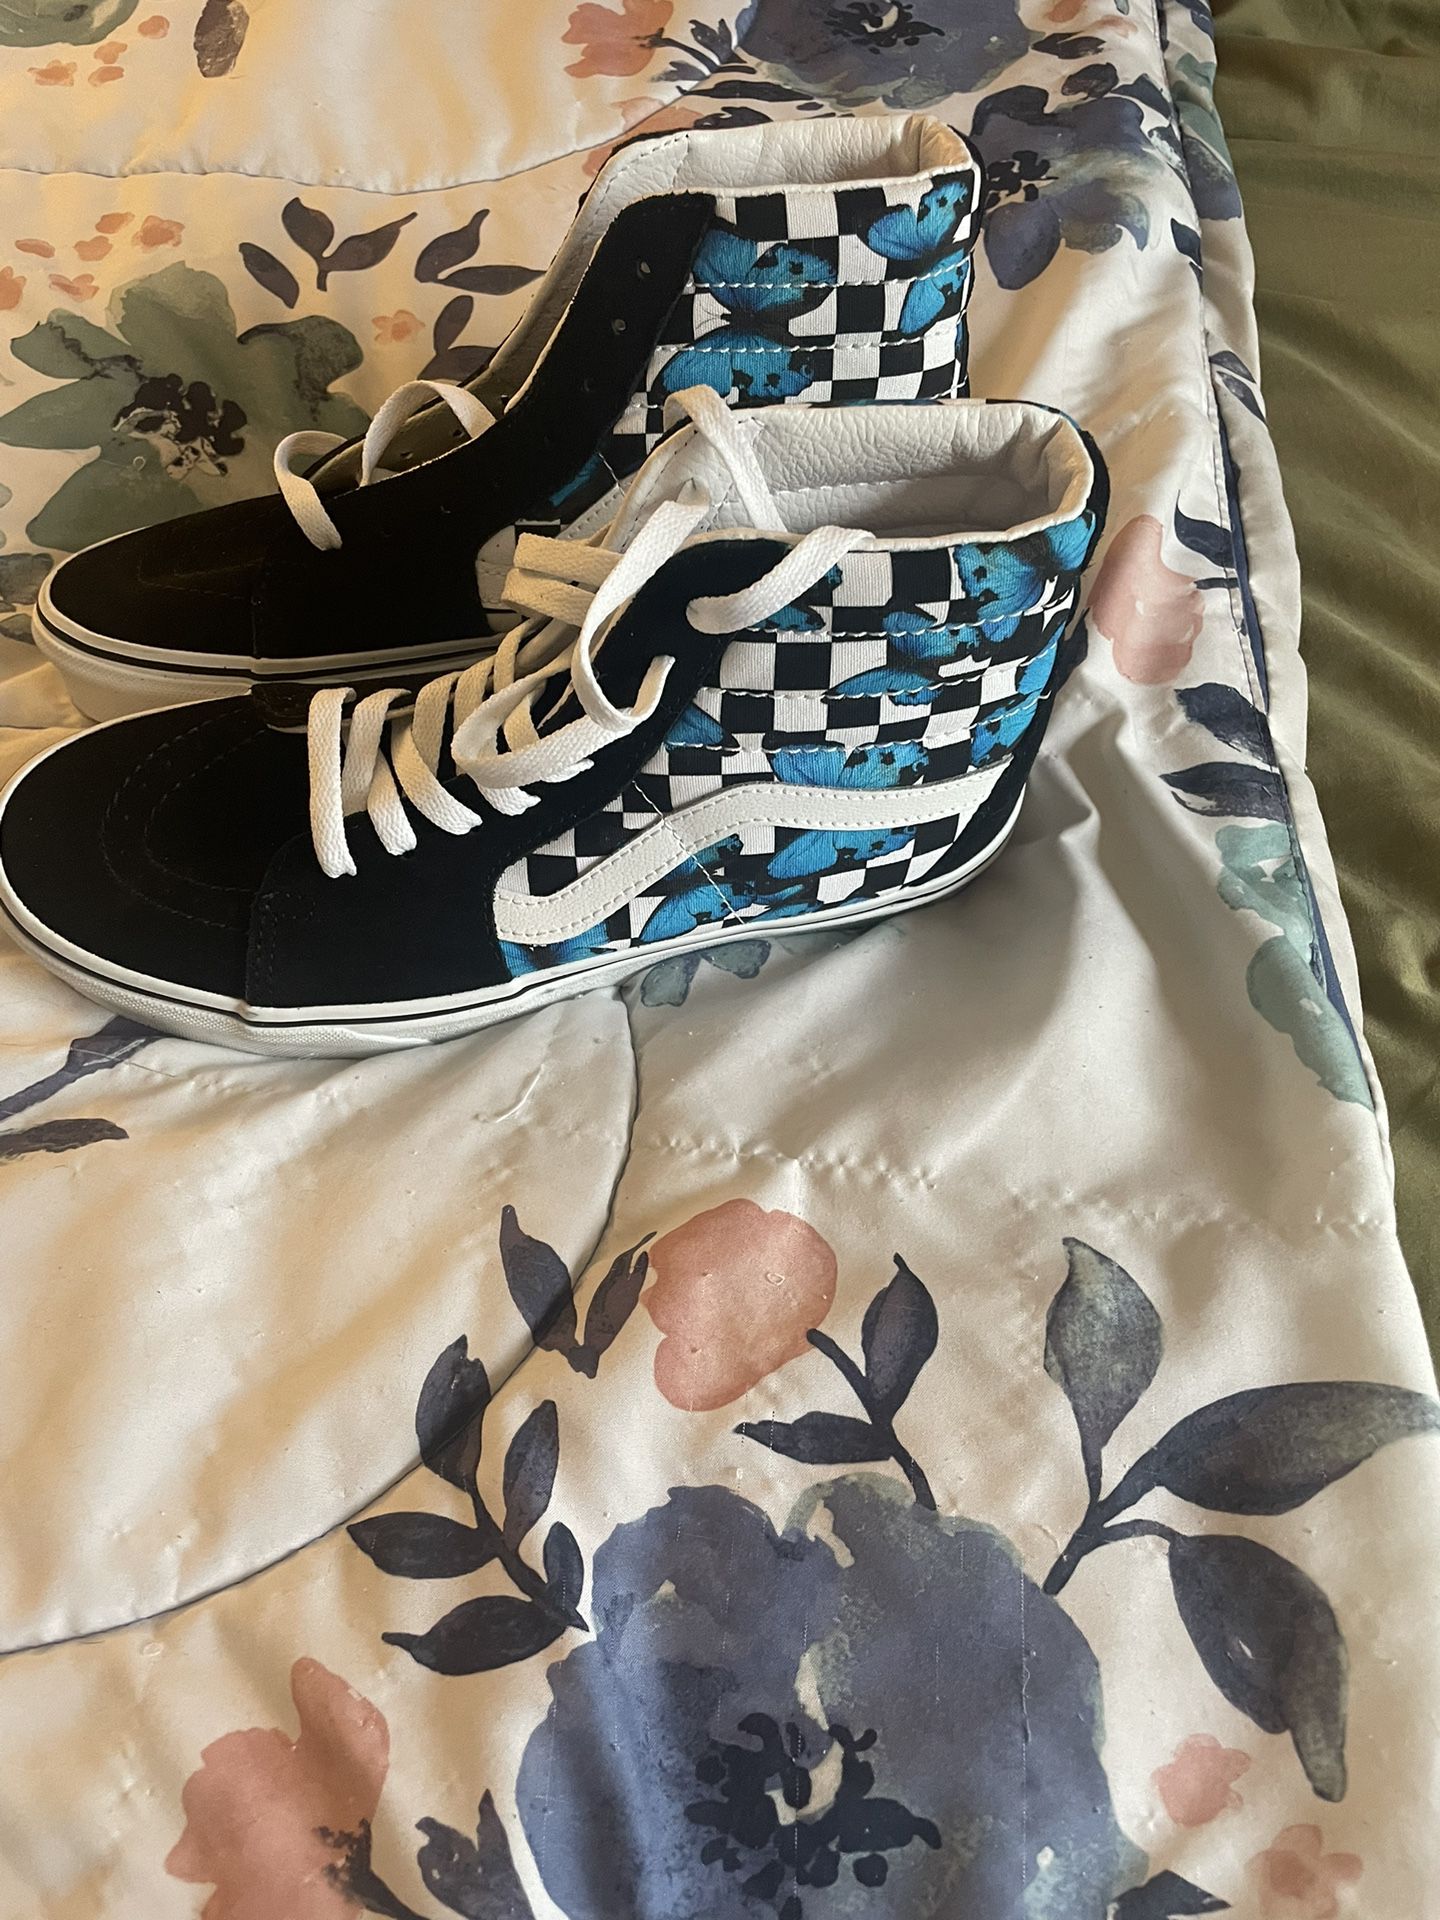 Butterfly Vans Shoes 